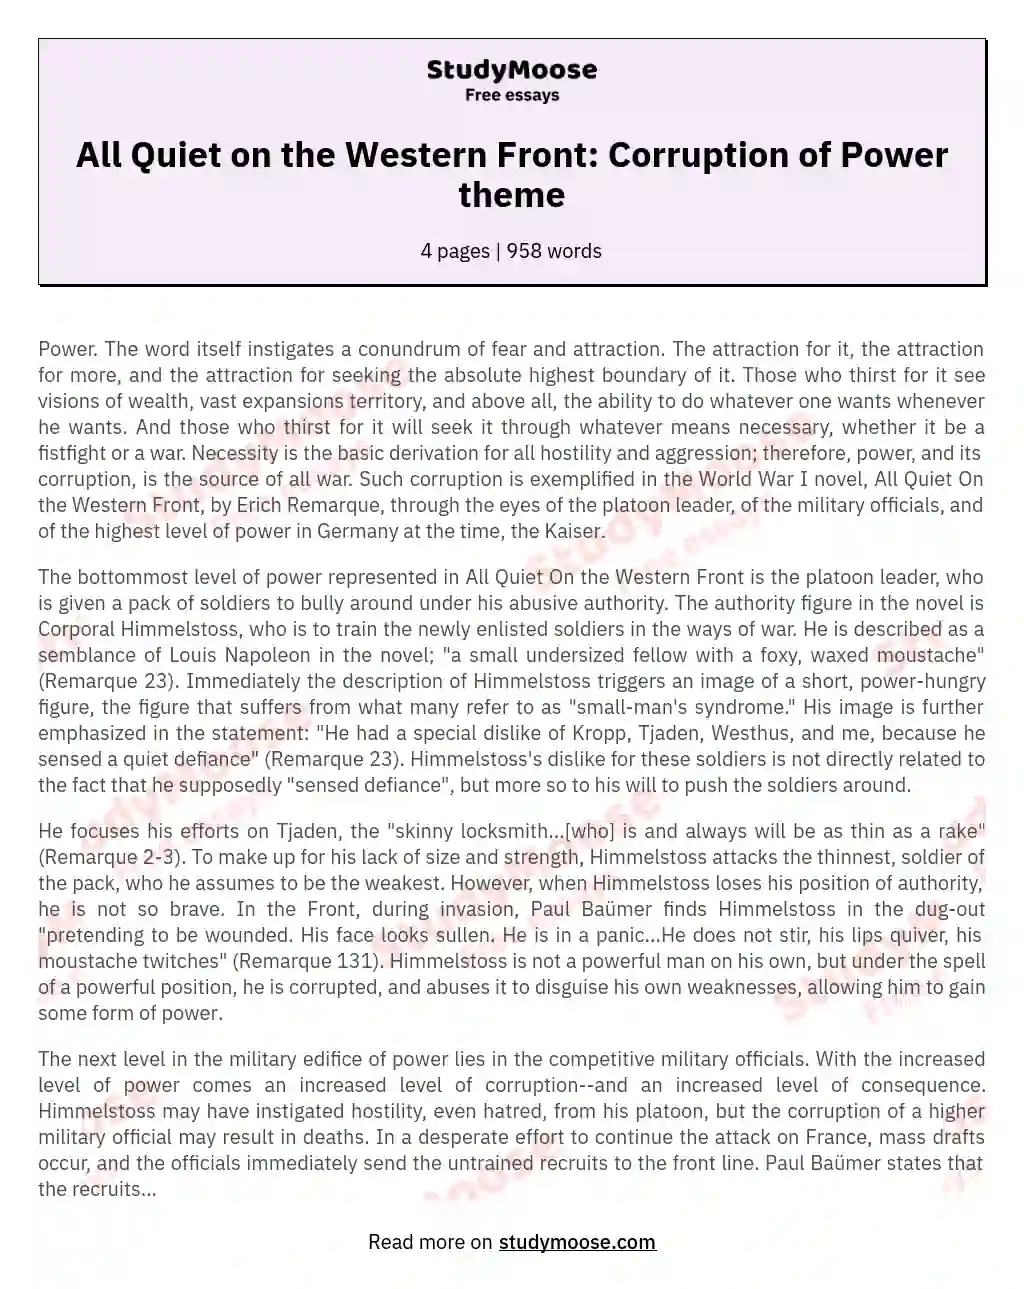 All Quiet on the Western Front: Corruption of Power theme